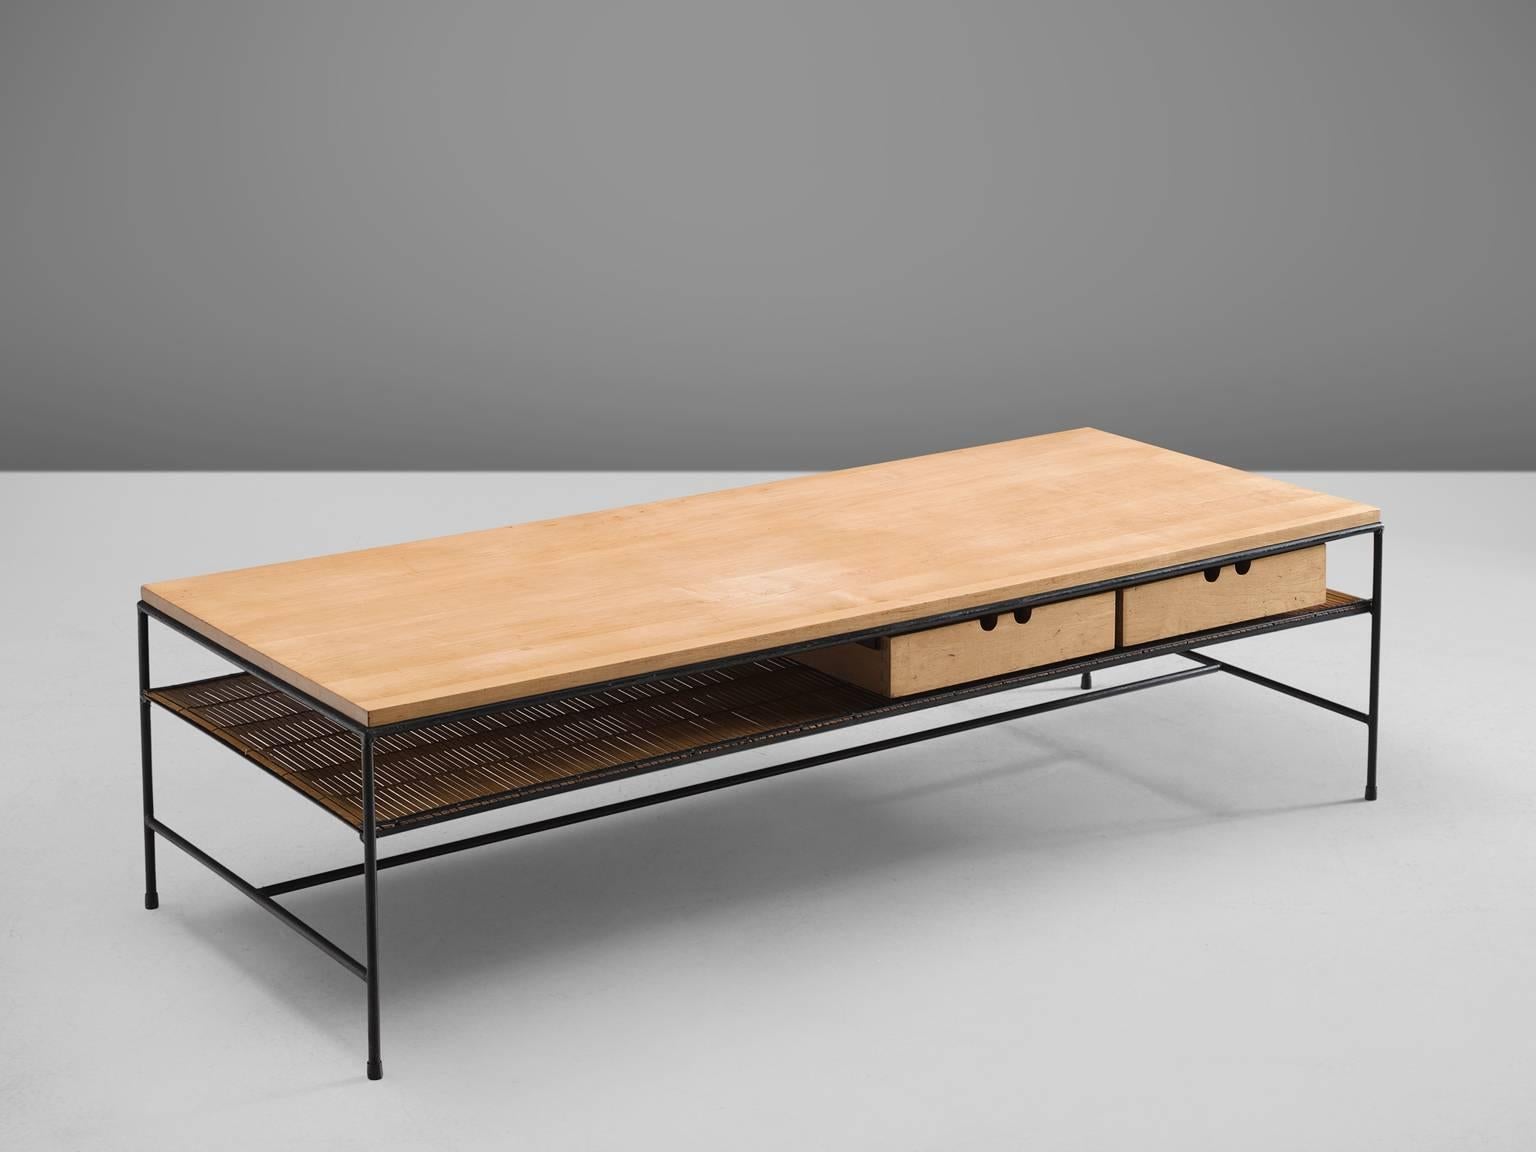 Paul McCob by Winchendon Furniture Company, coffee table, black lacquered metal, bamboo, United States, 1950s. 

This slender yet solid coffee table by Paul McCobb is typical for midcentury design collection. This piece has a black coated metal